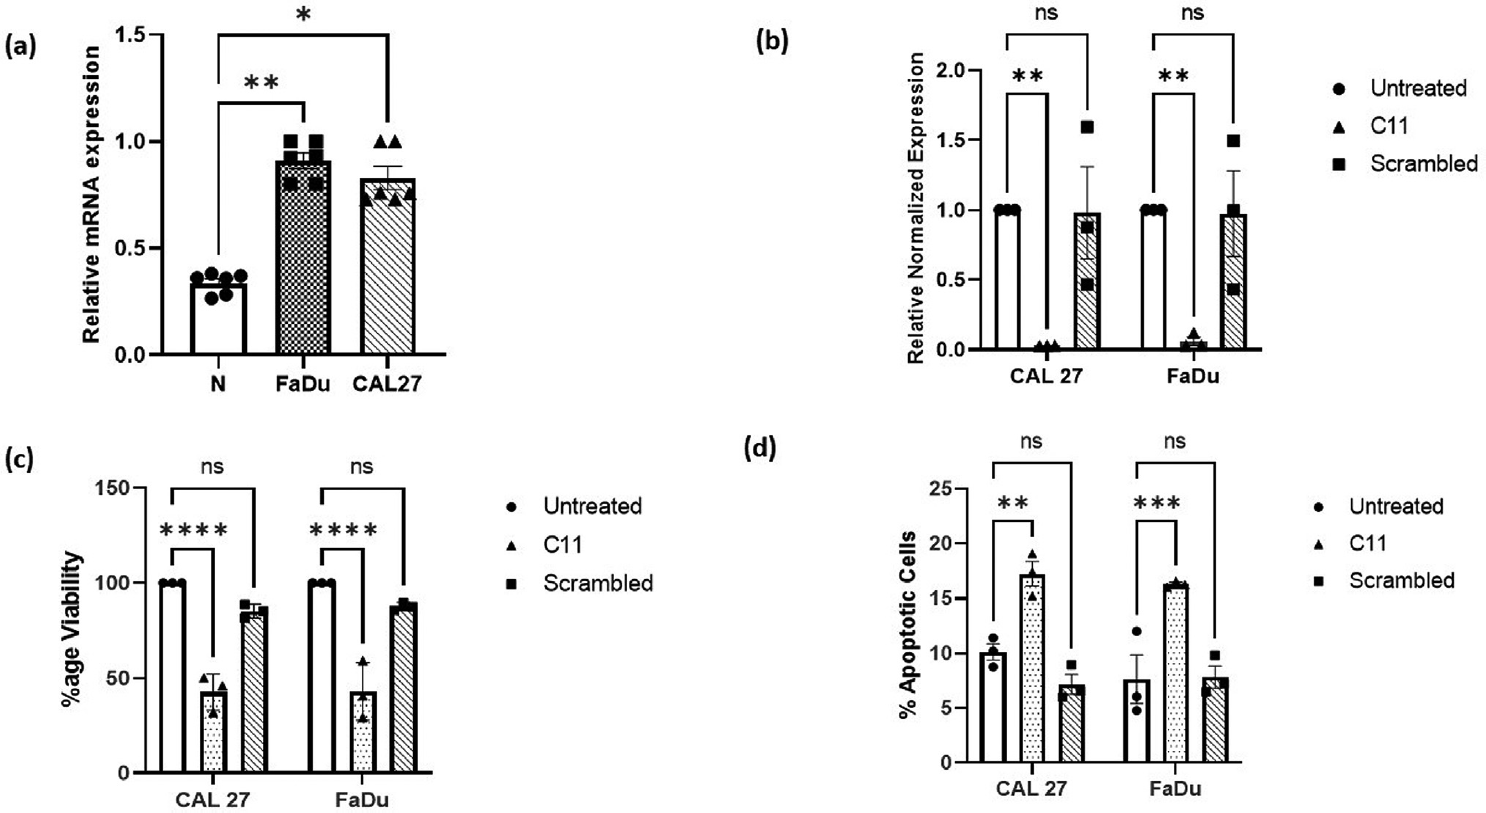 (a) Cystatin A gene (CSTA) expression was analyzed by qRT-PCR. CSTA mRNA was significantly upregulated in CAL 27 (p = 0.0248*) and in FaDu (p = 0.0015**) cell lines as compared to normal gingival epithelium tissue (N). Fig 1(b) Cystatin A gene expression levels in CAL 27 and FaDu stable cell lines were analyzed by qRT-PCR. CSTA gene was significantly downregulated by C11 CSTA shRNA-expressing vector, both in CAL 27 (p = 0.0054**) and FaDu (p = 0.0067 **) cell lines as compared to untreated cell lines. Fig 1(c) MTT assay revealed that the percentage viability of cells was significantly decreased both in C11 CAL 27 (p <0.0001****) and FaDu (p <0.0001****) in comparison with that of untreated. There was no significant change in the cell viability in case of scrambled cell lines. Fig 1(d) It was observed that the cisplatin-induced apoptosis was significantly increased in the CAL 27 (p = 0.0025**) and FaDu (p = 0.0005***) cell lines upon the knockdown of CSTA as compared to the untreated cell line. The induction of apoptosis in scrambled control was almost similar to that of untreated.